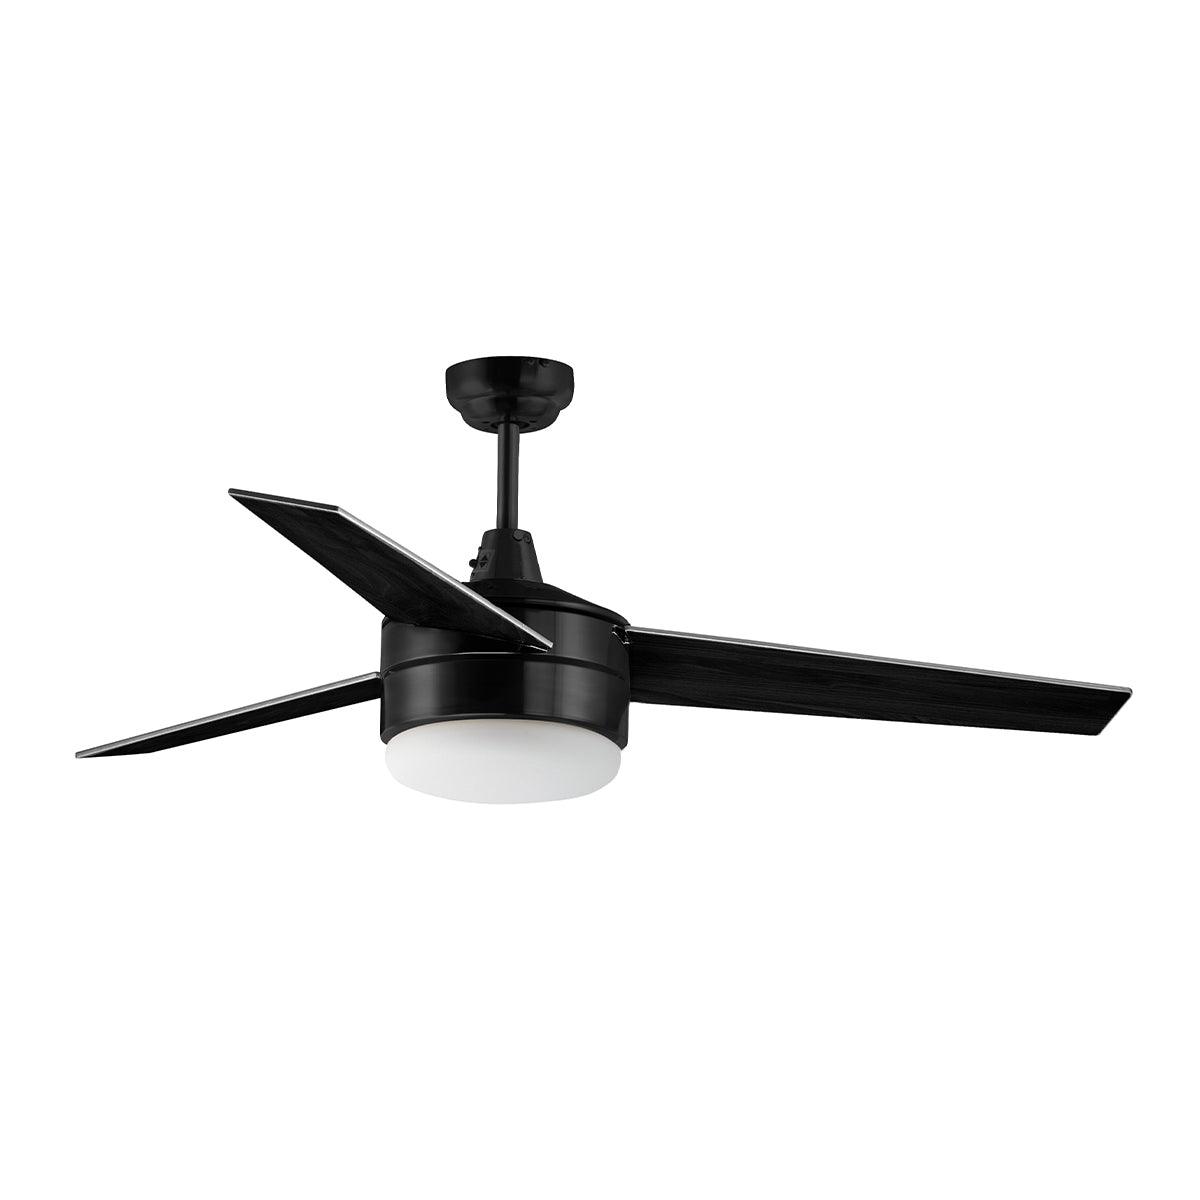 Trio 52 Inch LED 2-Light Ceiling Fan With Wall Control